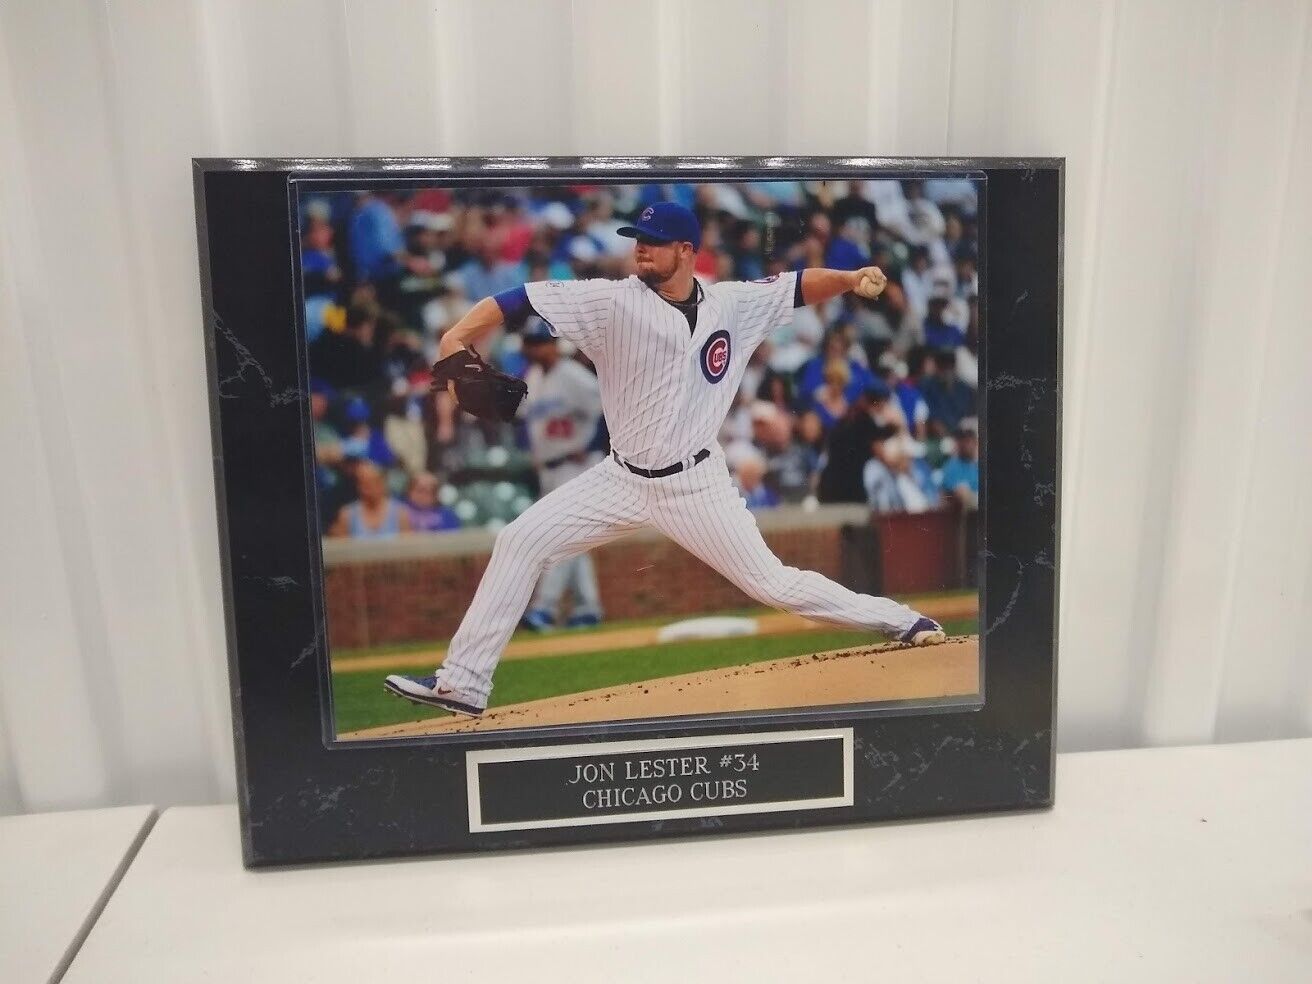 Jon Lester Chicago Cubs 10 1/2 x 13 Black Marble Plaque With 8x10 Photo